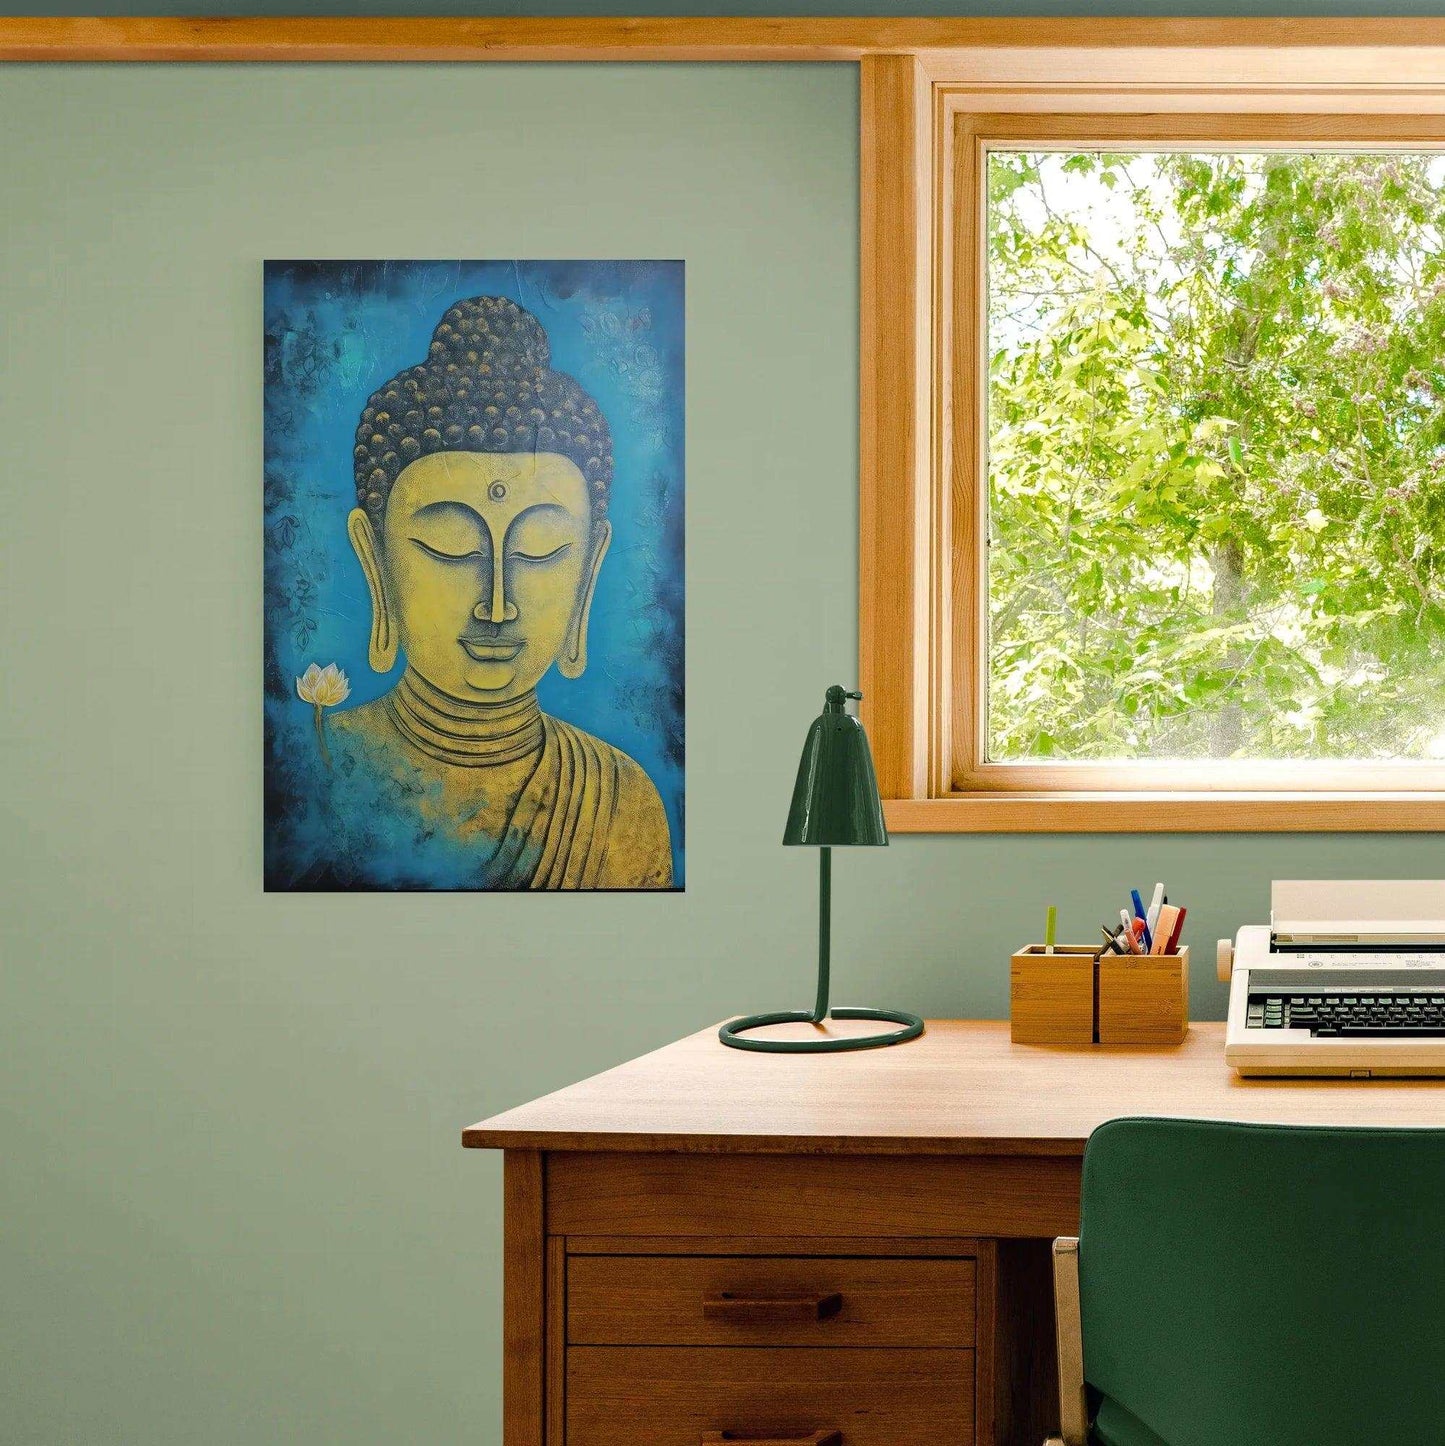 Tranquil blue and gold Buddha portrait mounted on a sage green wall beside a window with a view of lush greenery, complementing a classic wooden desk with a typewriter, lamp, and office supplies, creating a serene workspace.